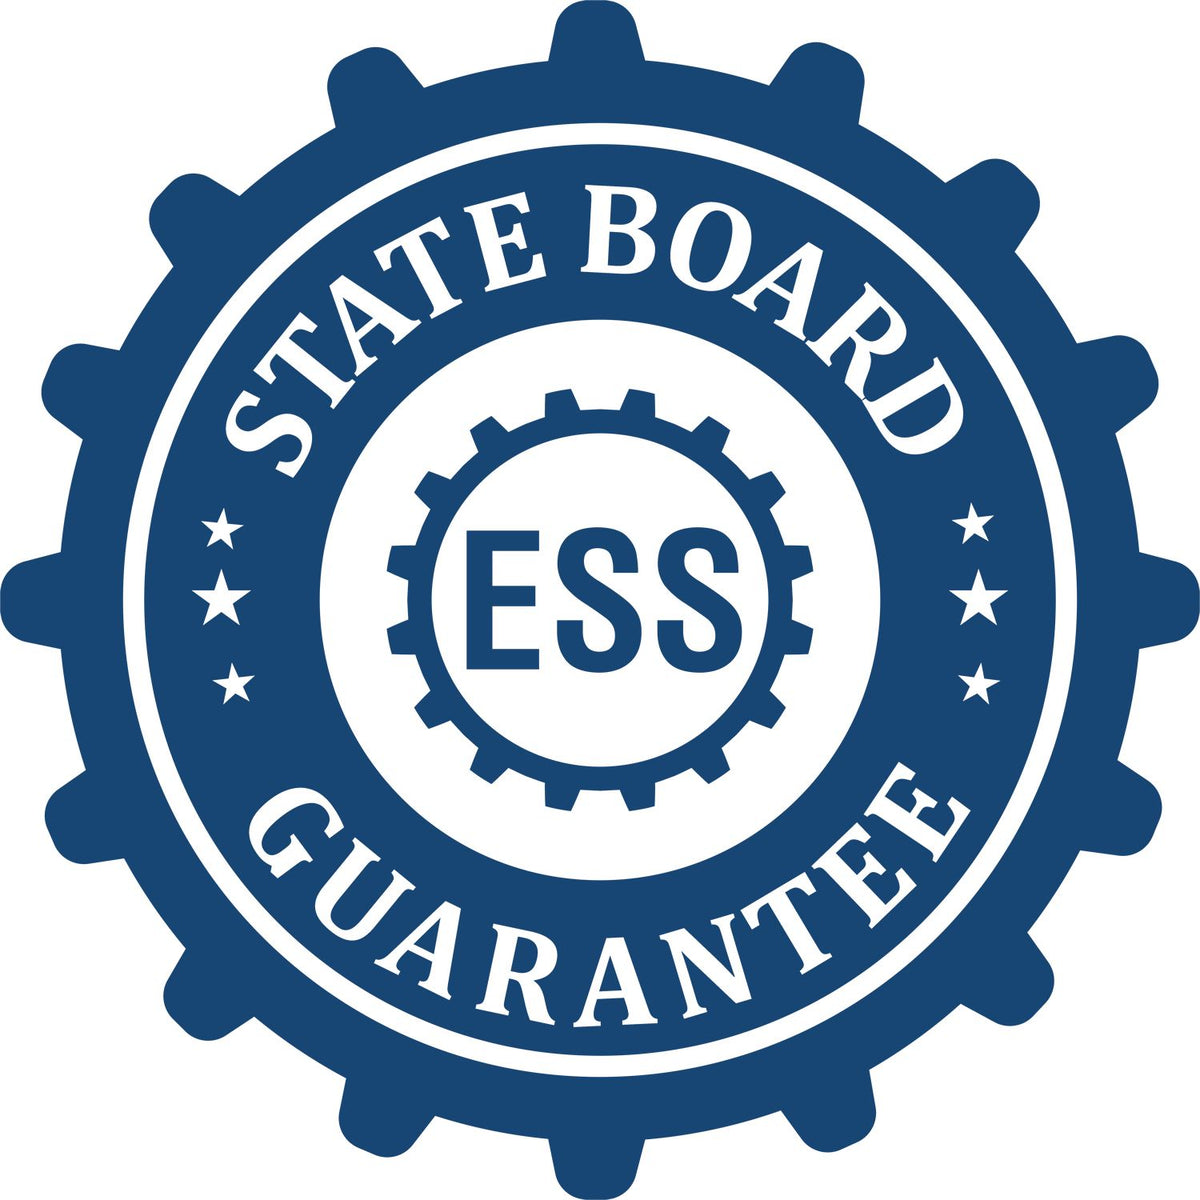 An emblem in a gear shape illustrating a state board guarantee for the Hybrid Maryland Land Surveyor Seal